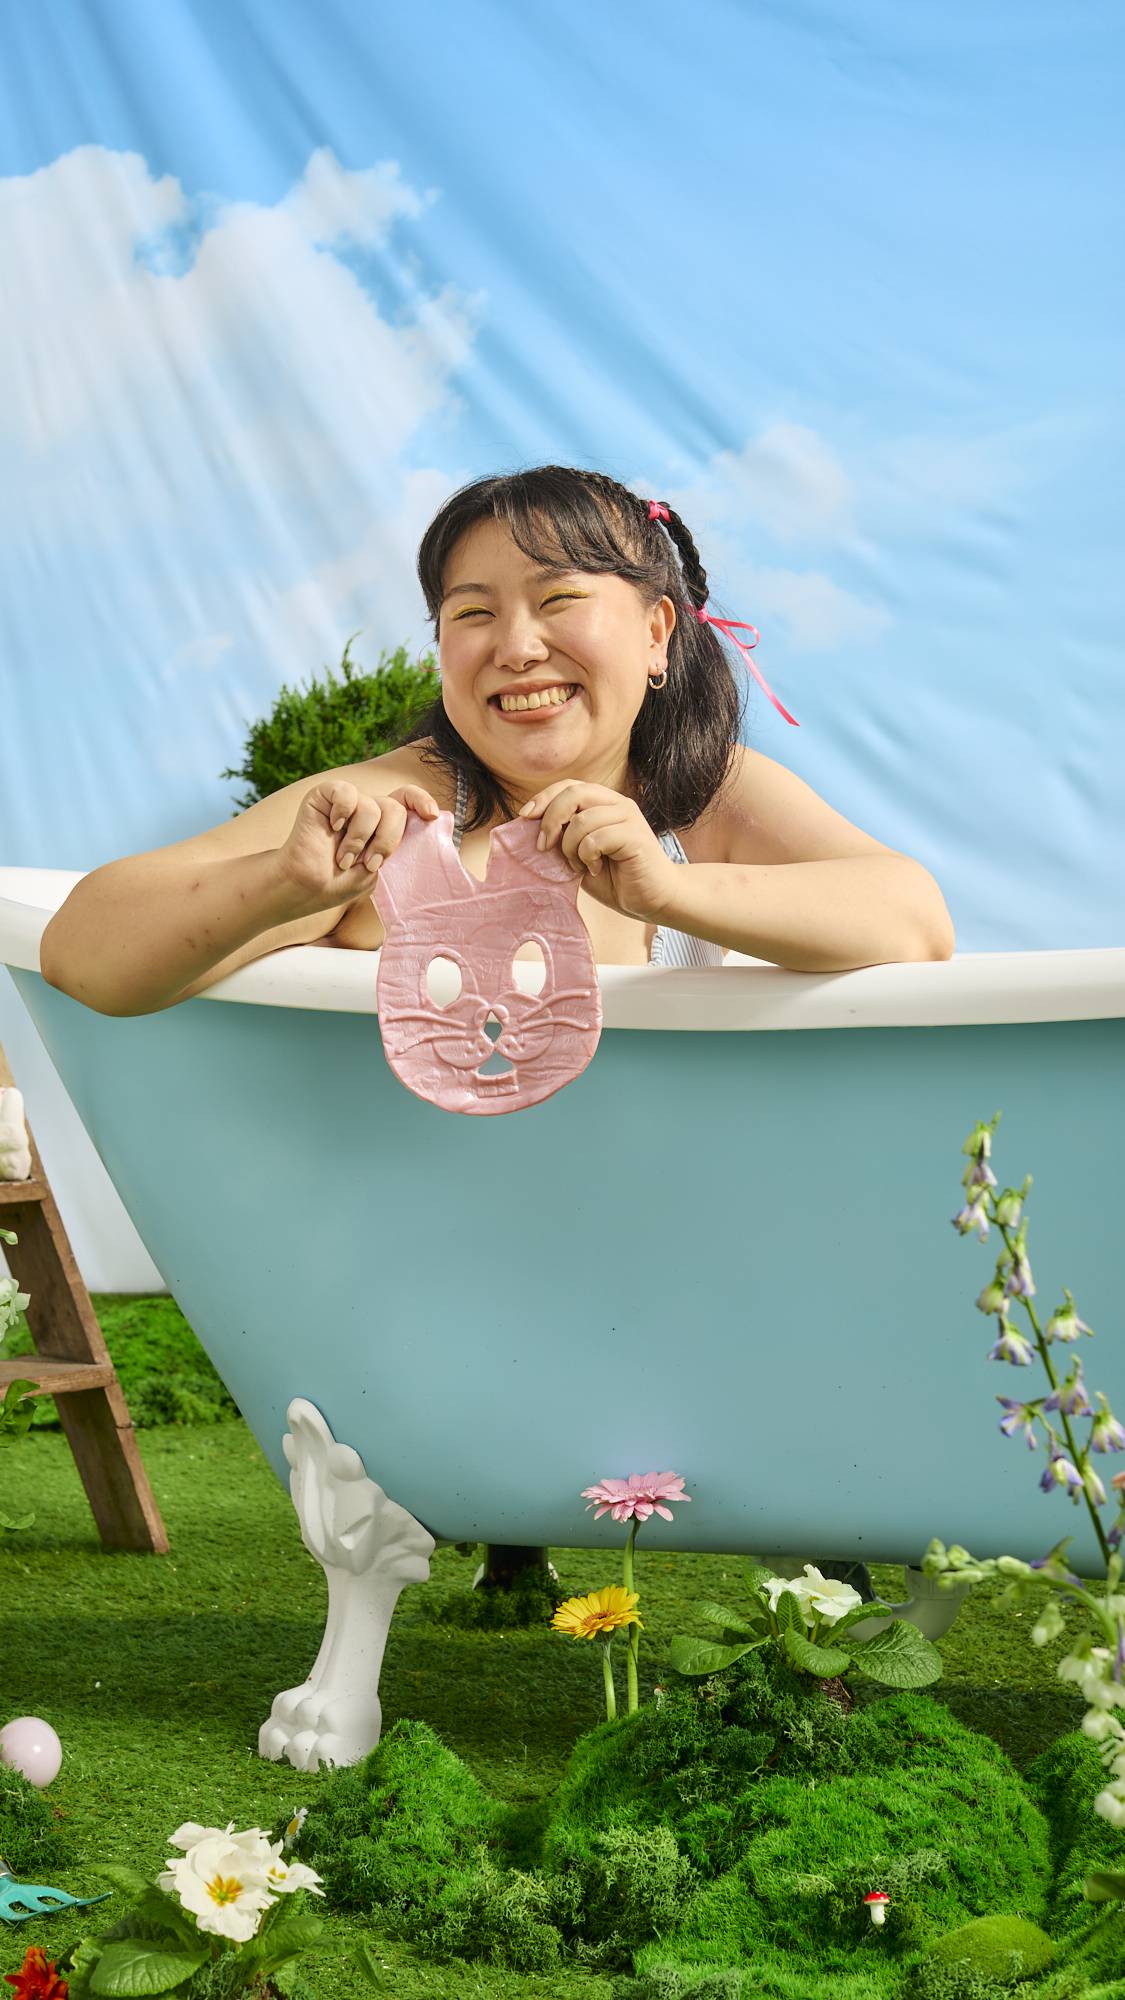 The model is sat in the outdoor, roll-top bath under blue skies are they hold the shimmery Bunny face mask. Grass and fresh spring flowers cover the floor. 